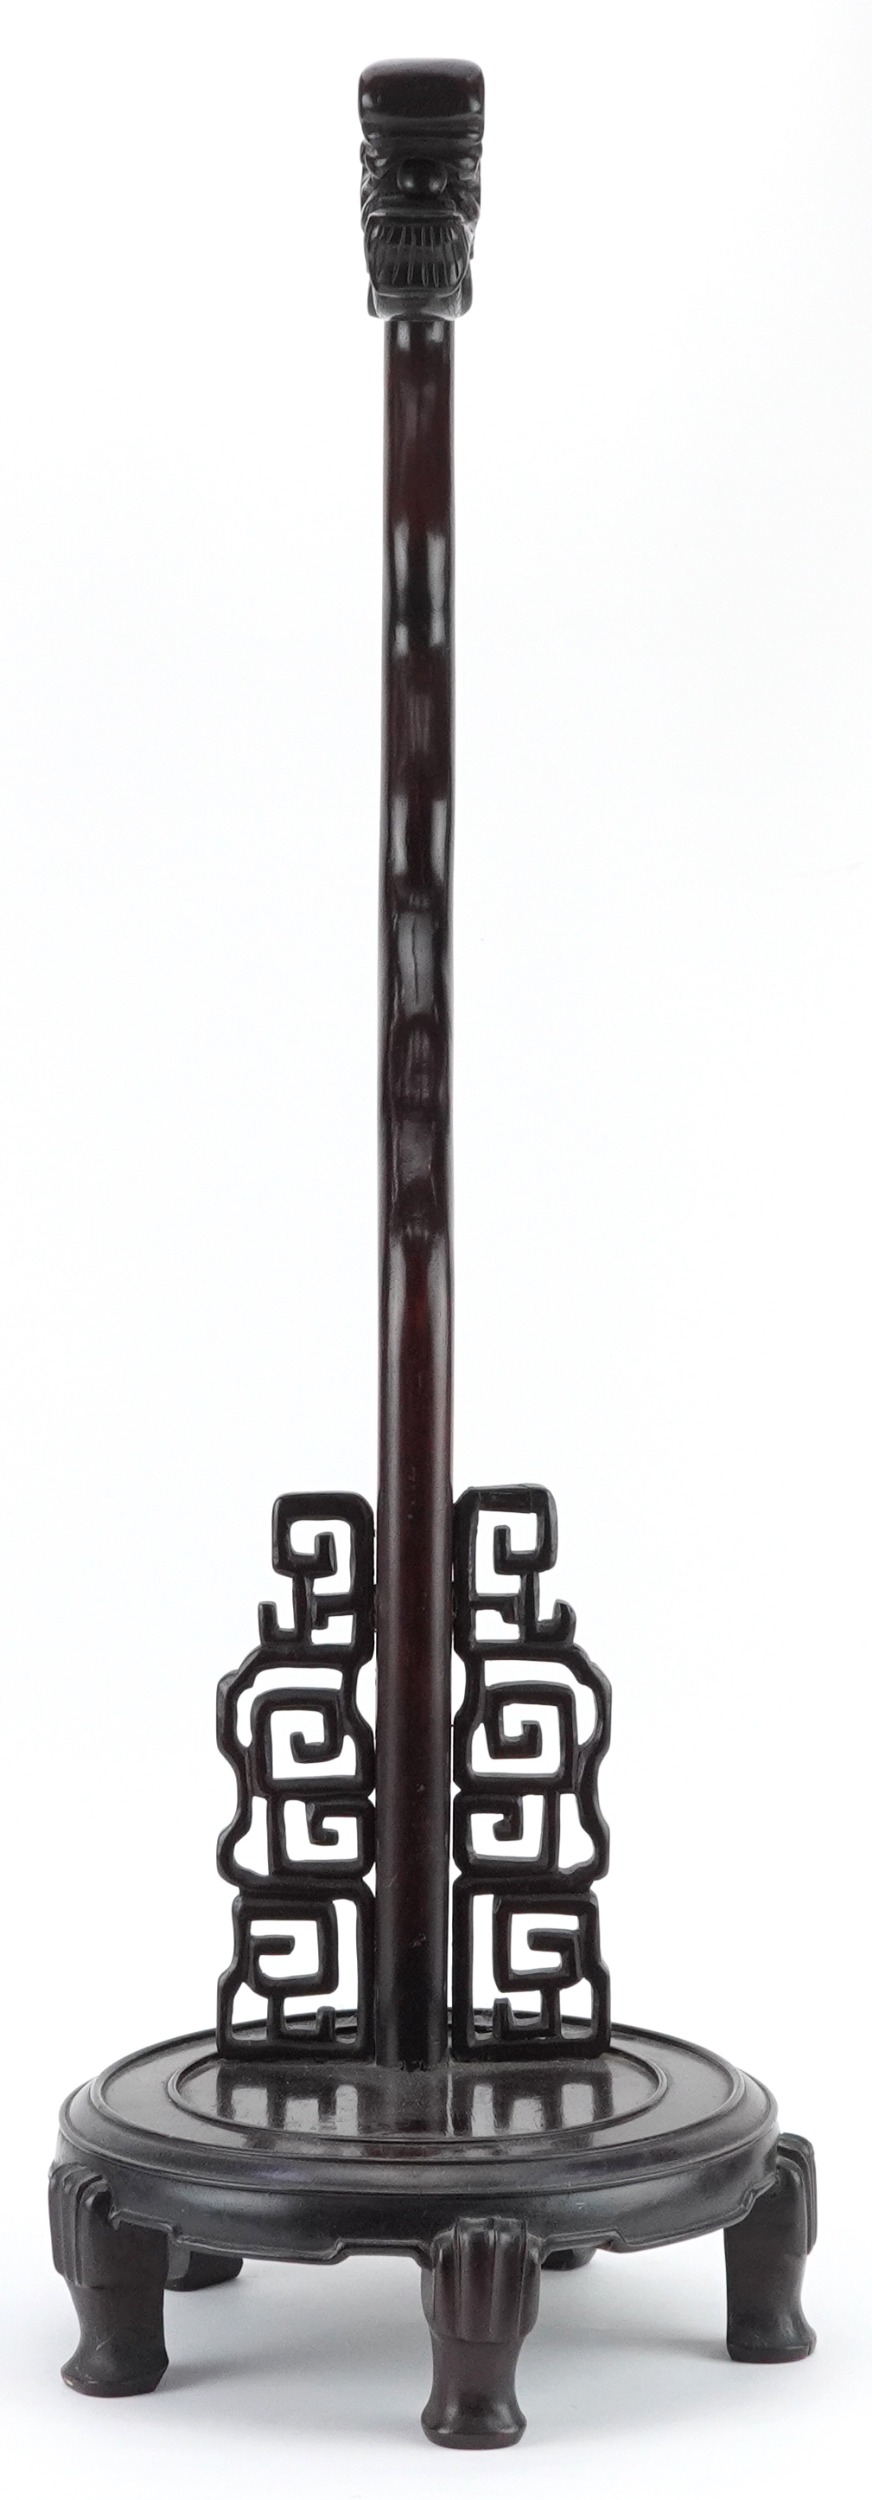 Chinese hardwood monastery bell stand carved with a dragon's head, possibly Hongmu, 71cm high - Image 2 of 8